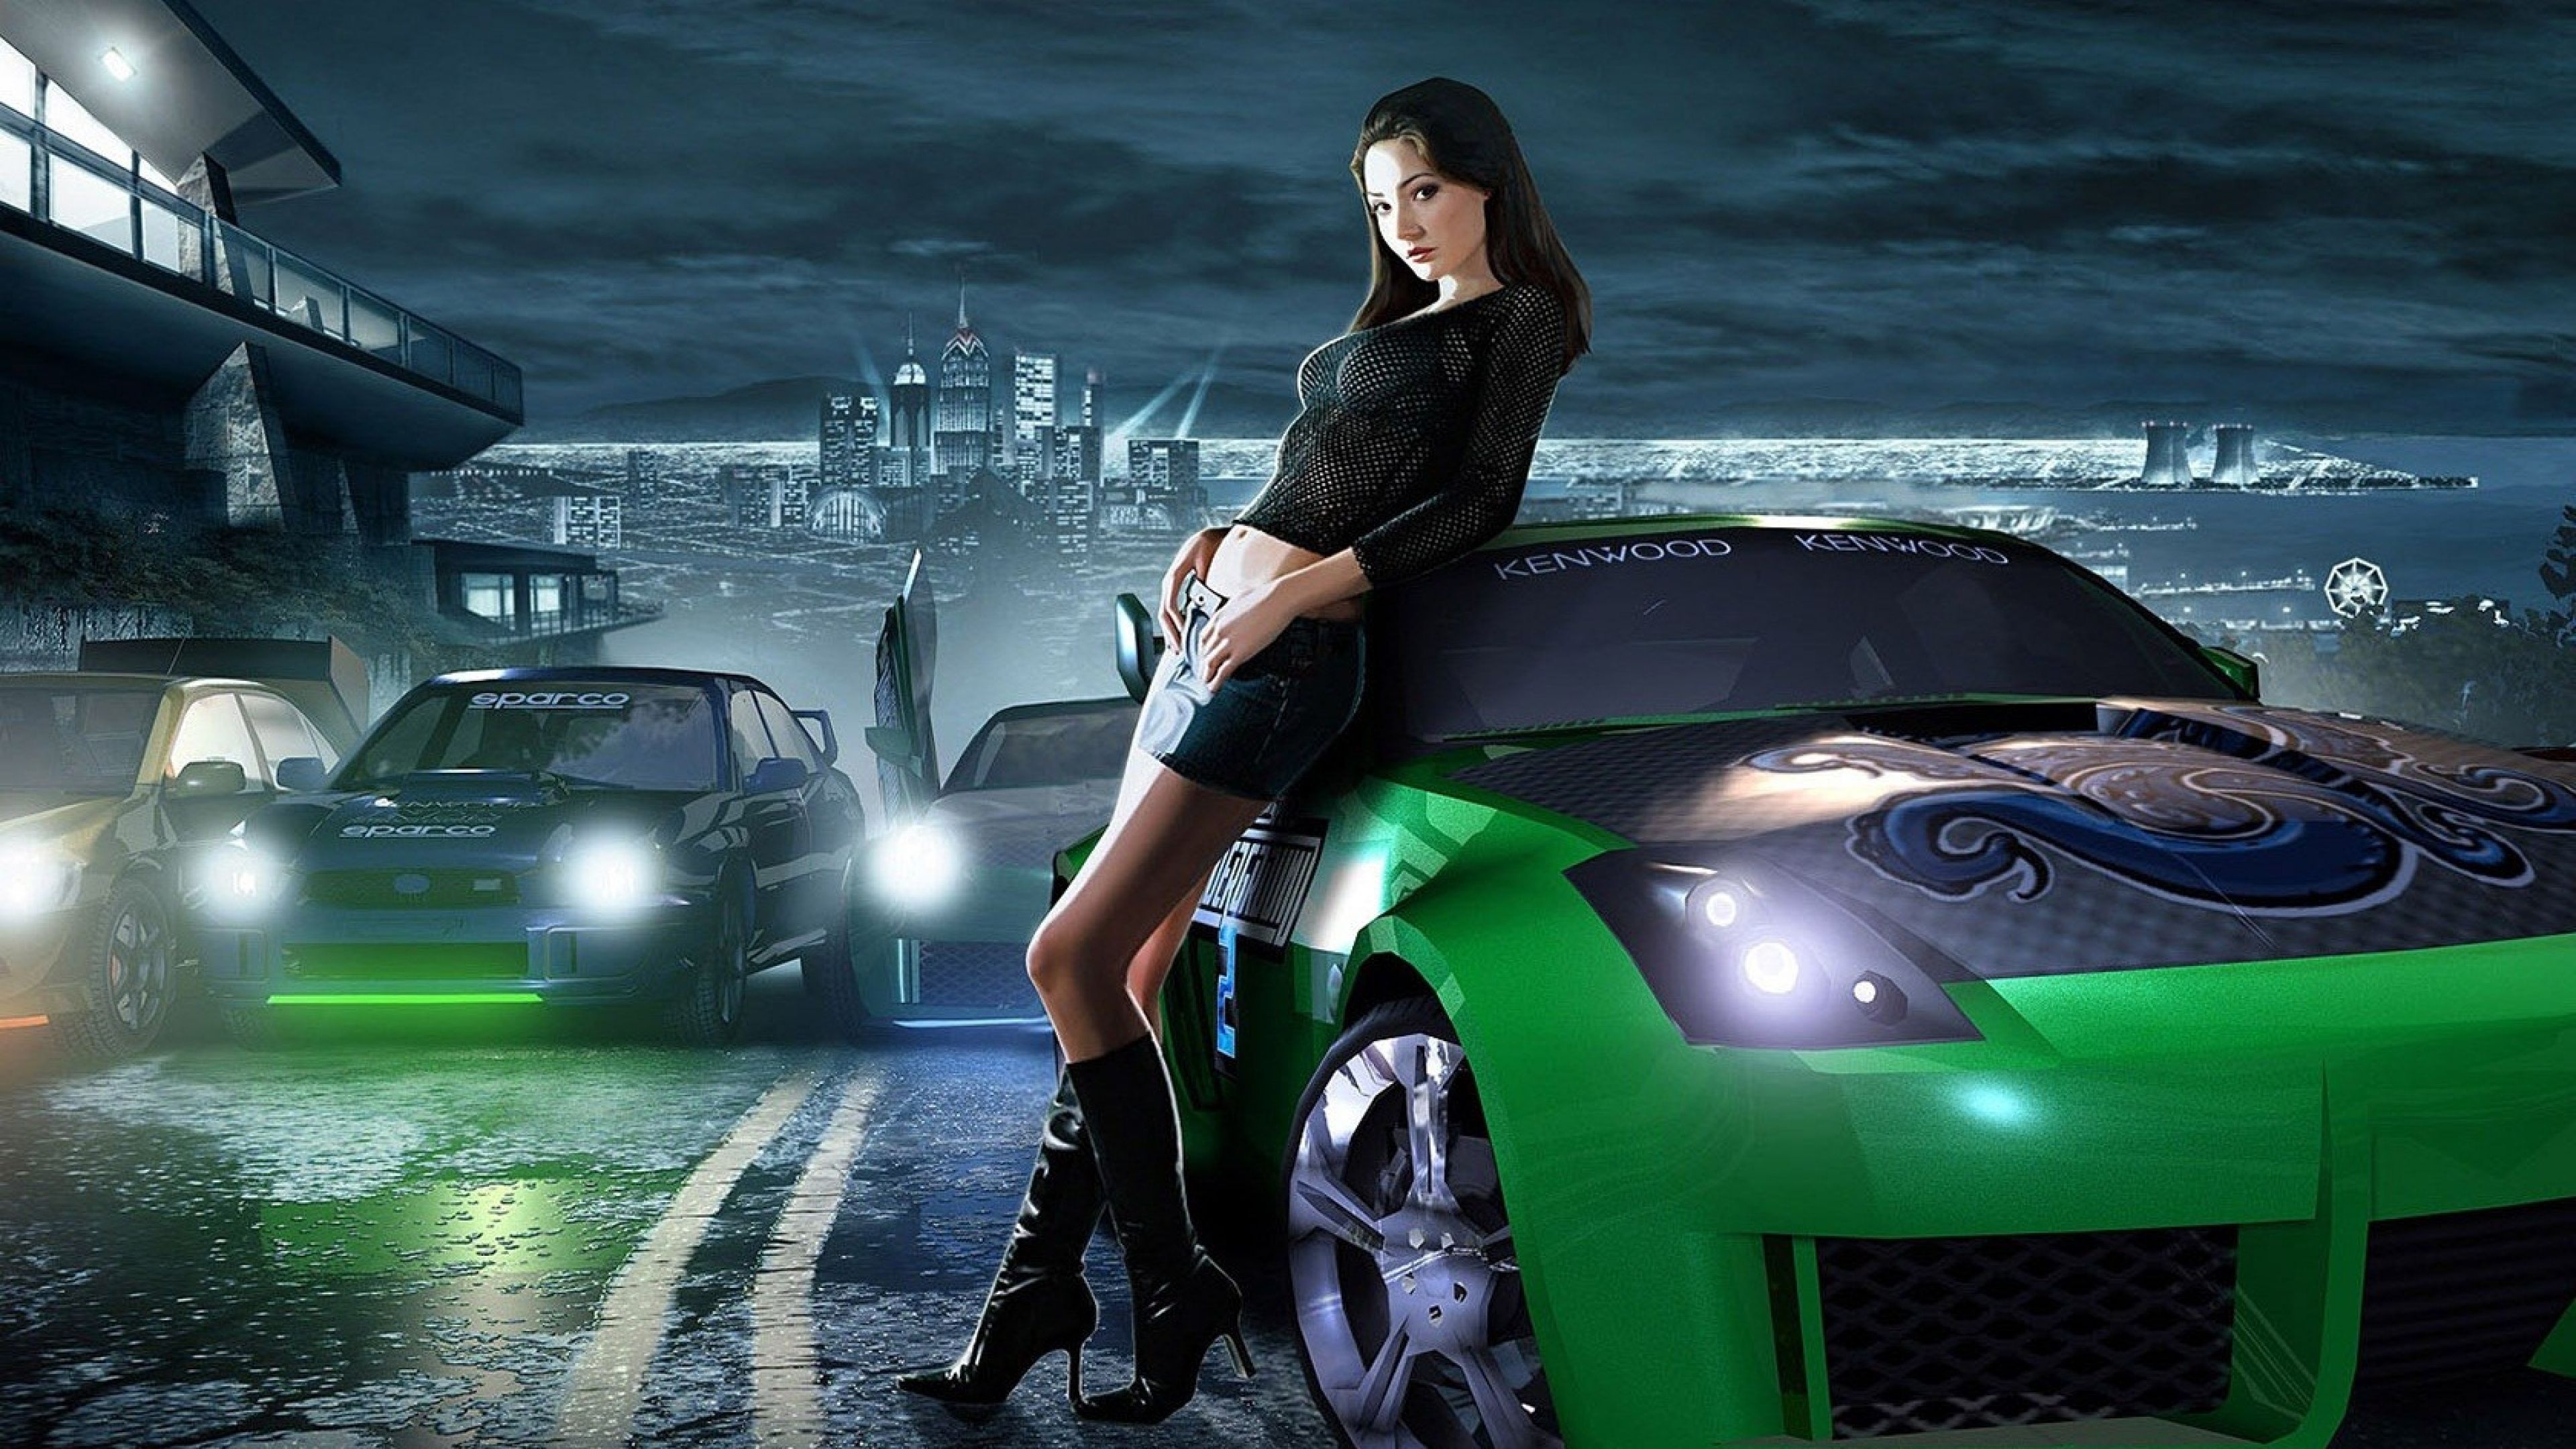 Download Wallpaper 3840x2160 Nfs, Need for speed, Girl, Car, City